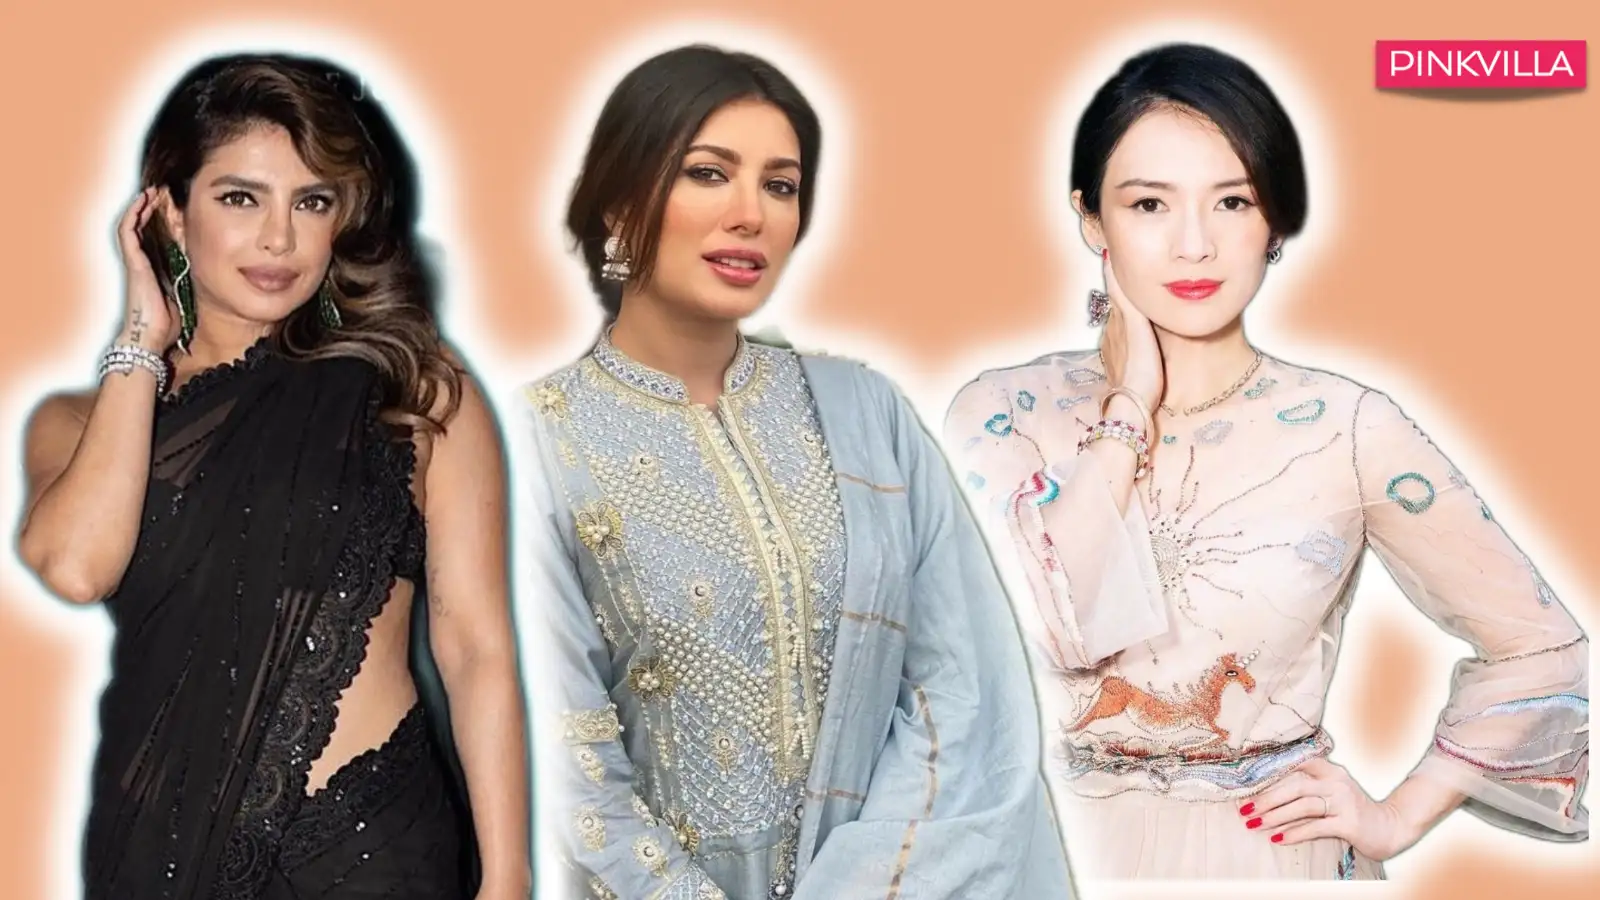 25 Most Beautiful Asian Women with Dazzling Personalities PINKVILLA picture